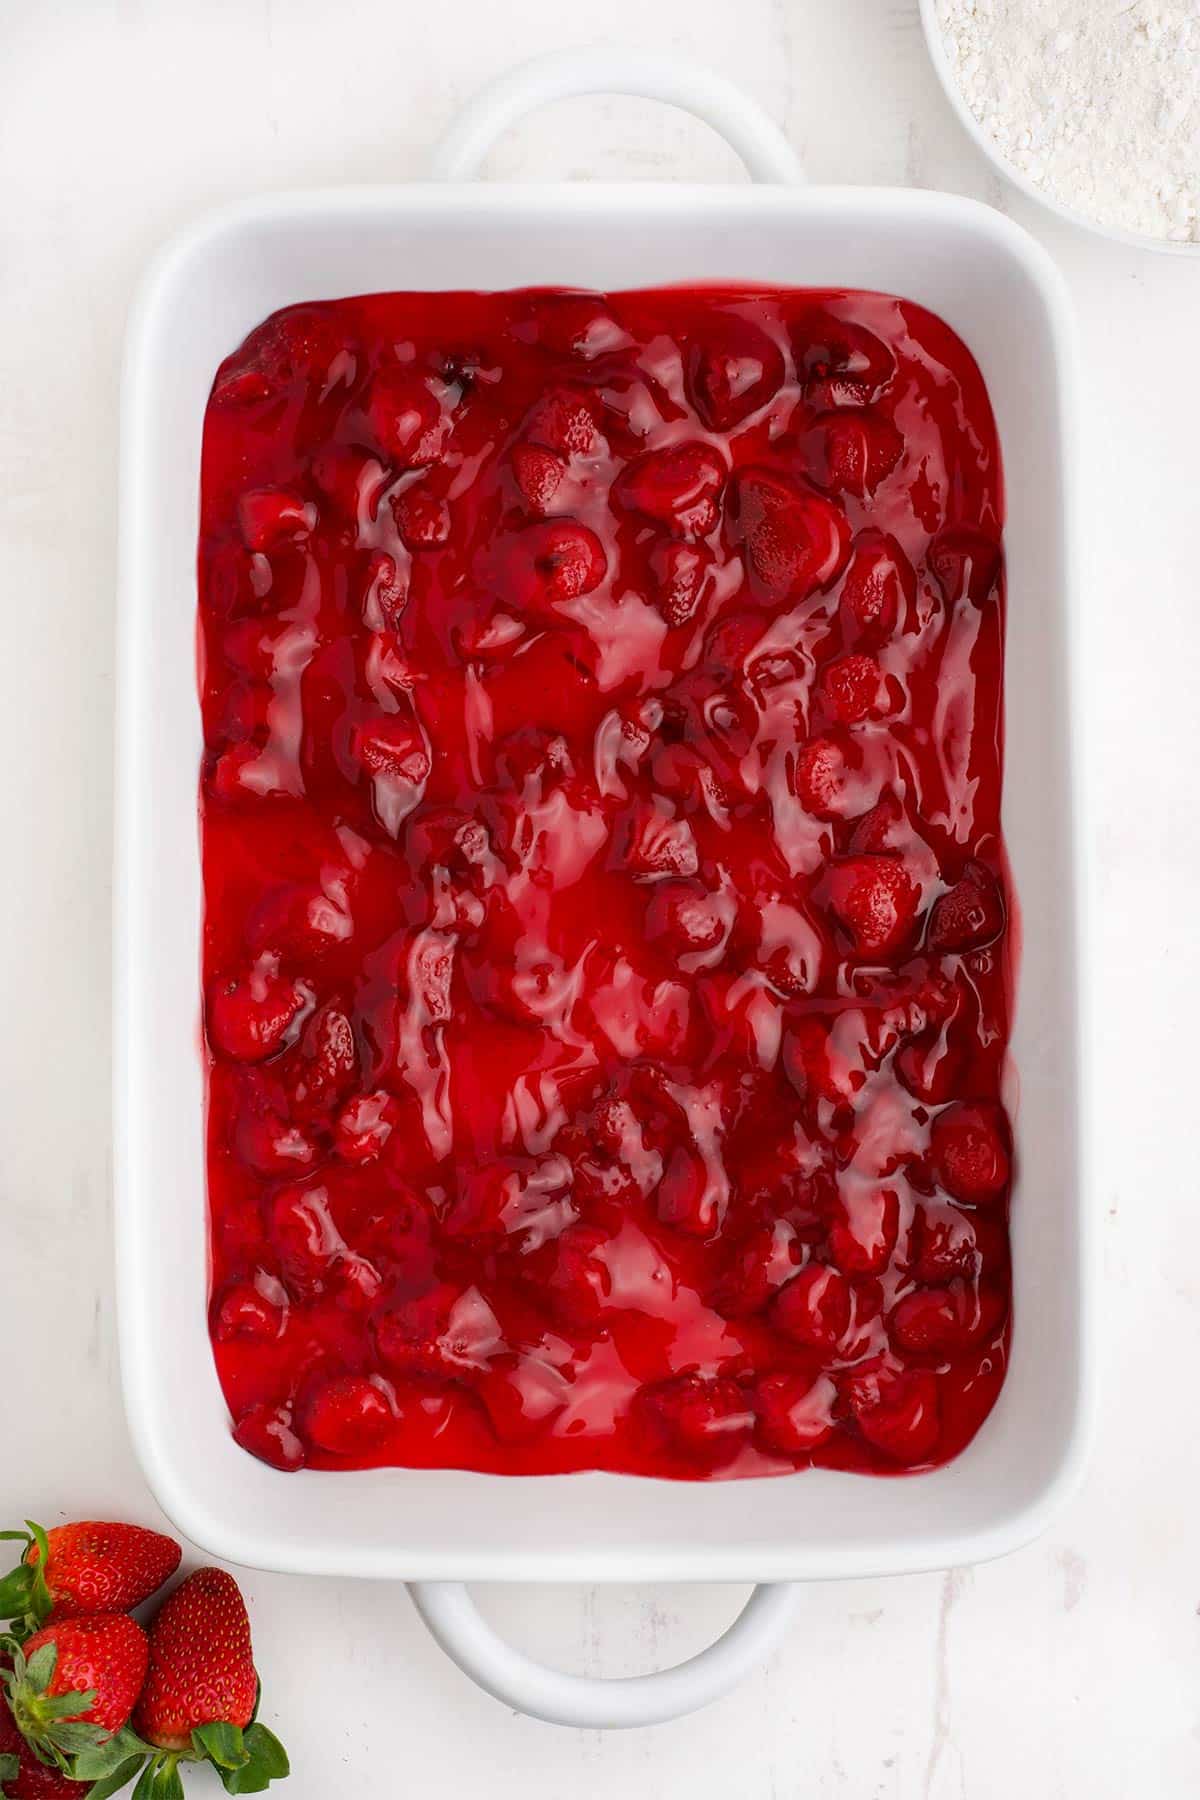 Strawberry pie filling spread in the bottom of a baking dish.